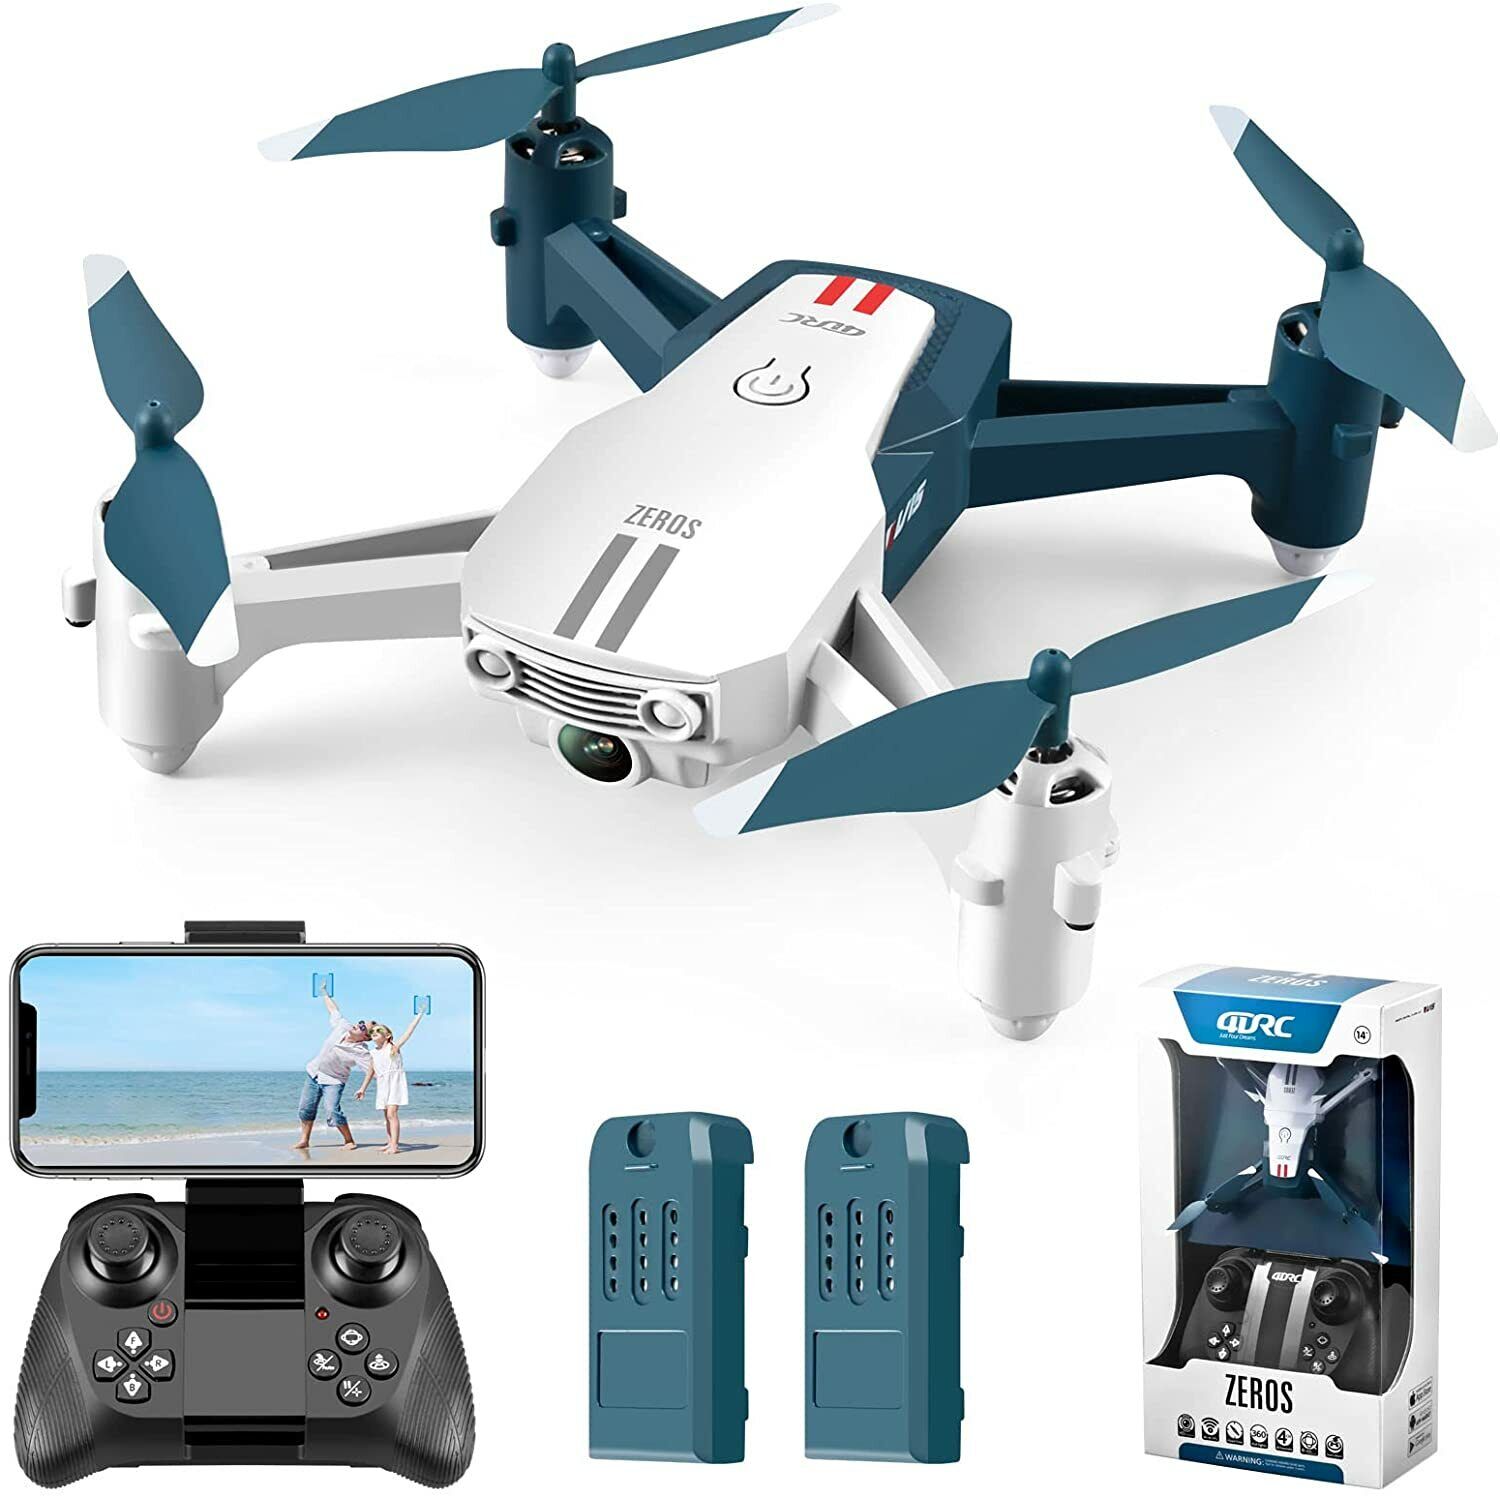 2022 NEW 4DRC V15 DRONE WIFI FPV 4K HD Camera Foldable Selfie RC Quadcopter US 4DRC Does Not Apply